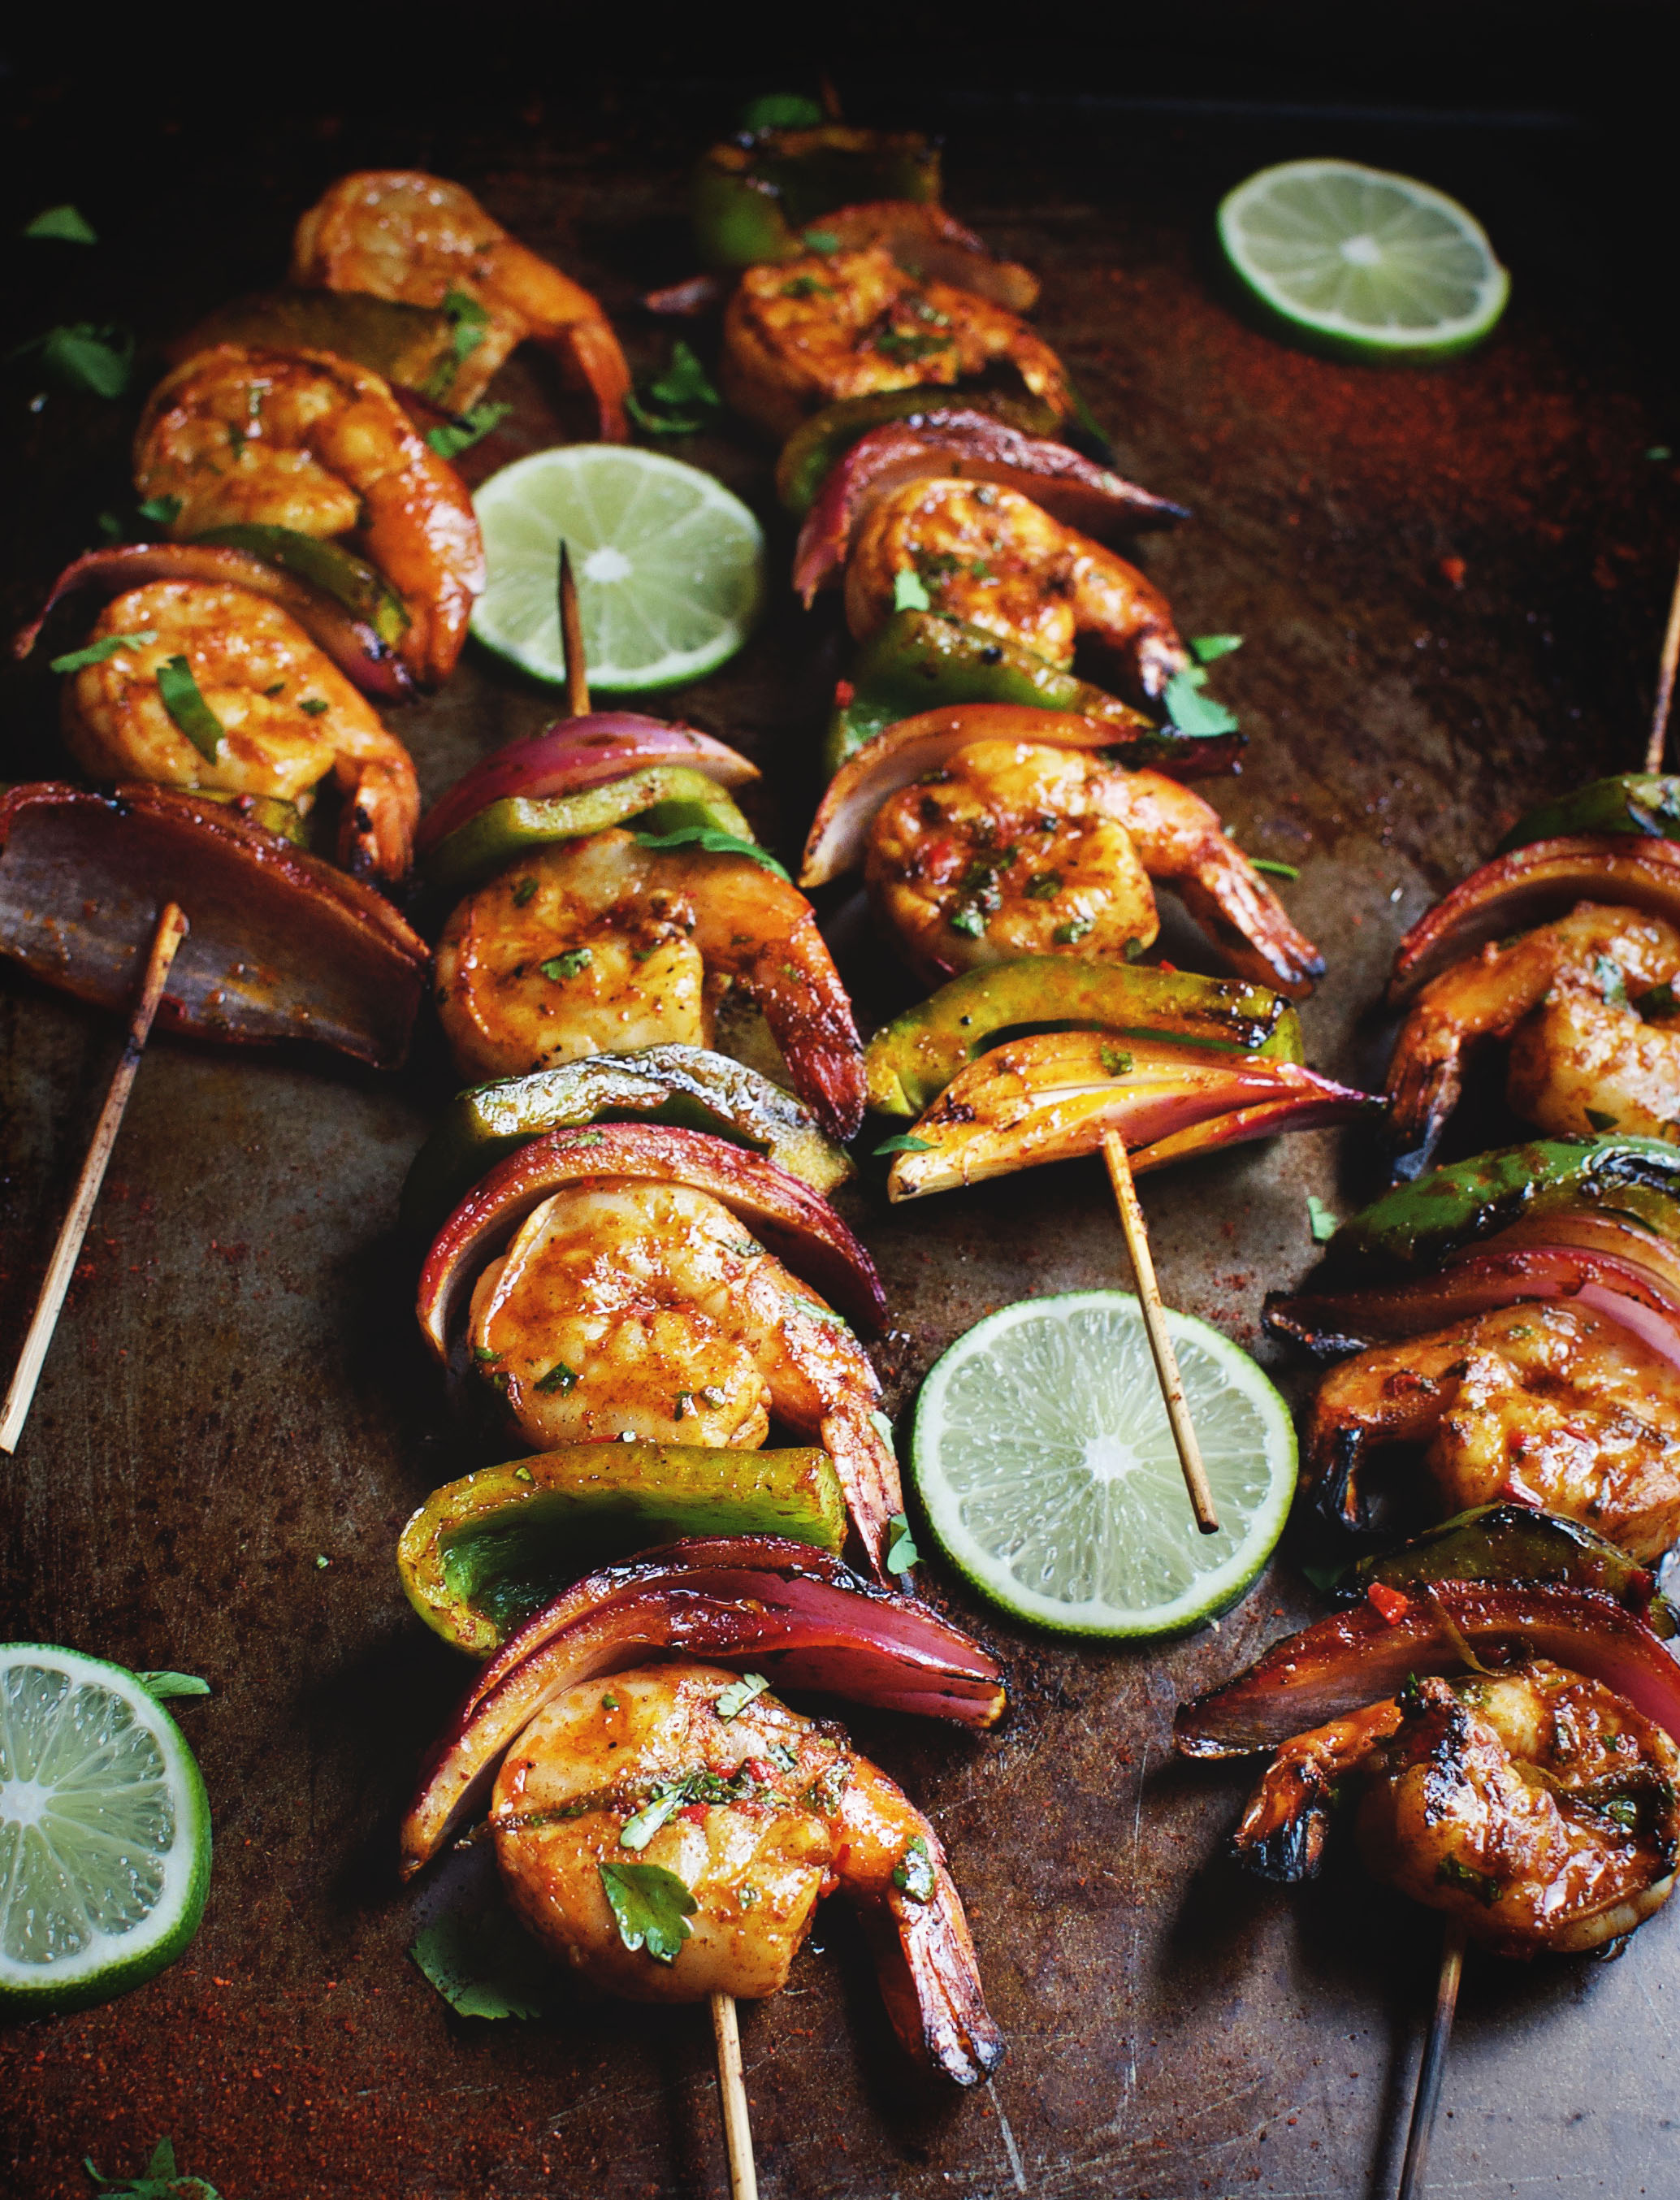 Grilled Chili Lime Shrimp Kabobs - Simply So Healthy